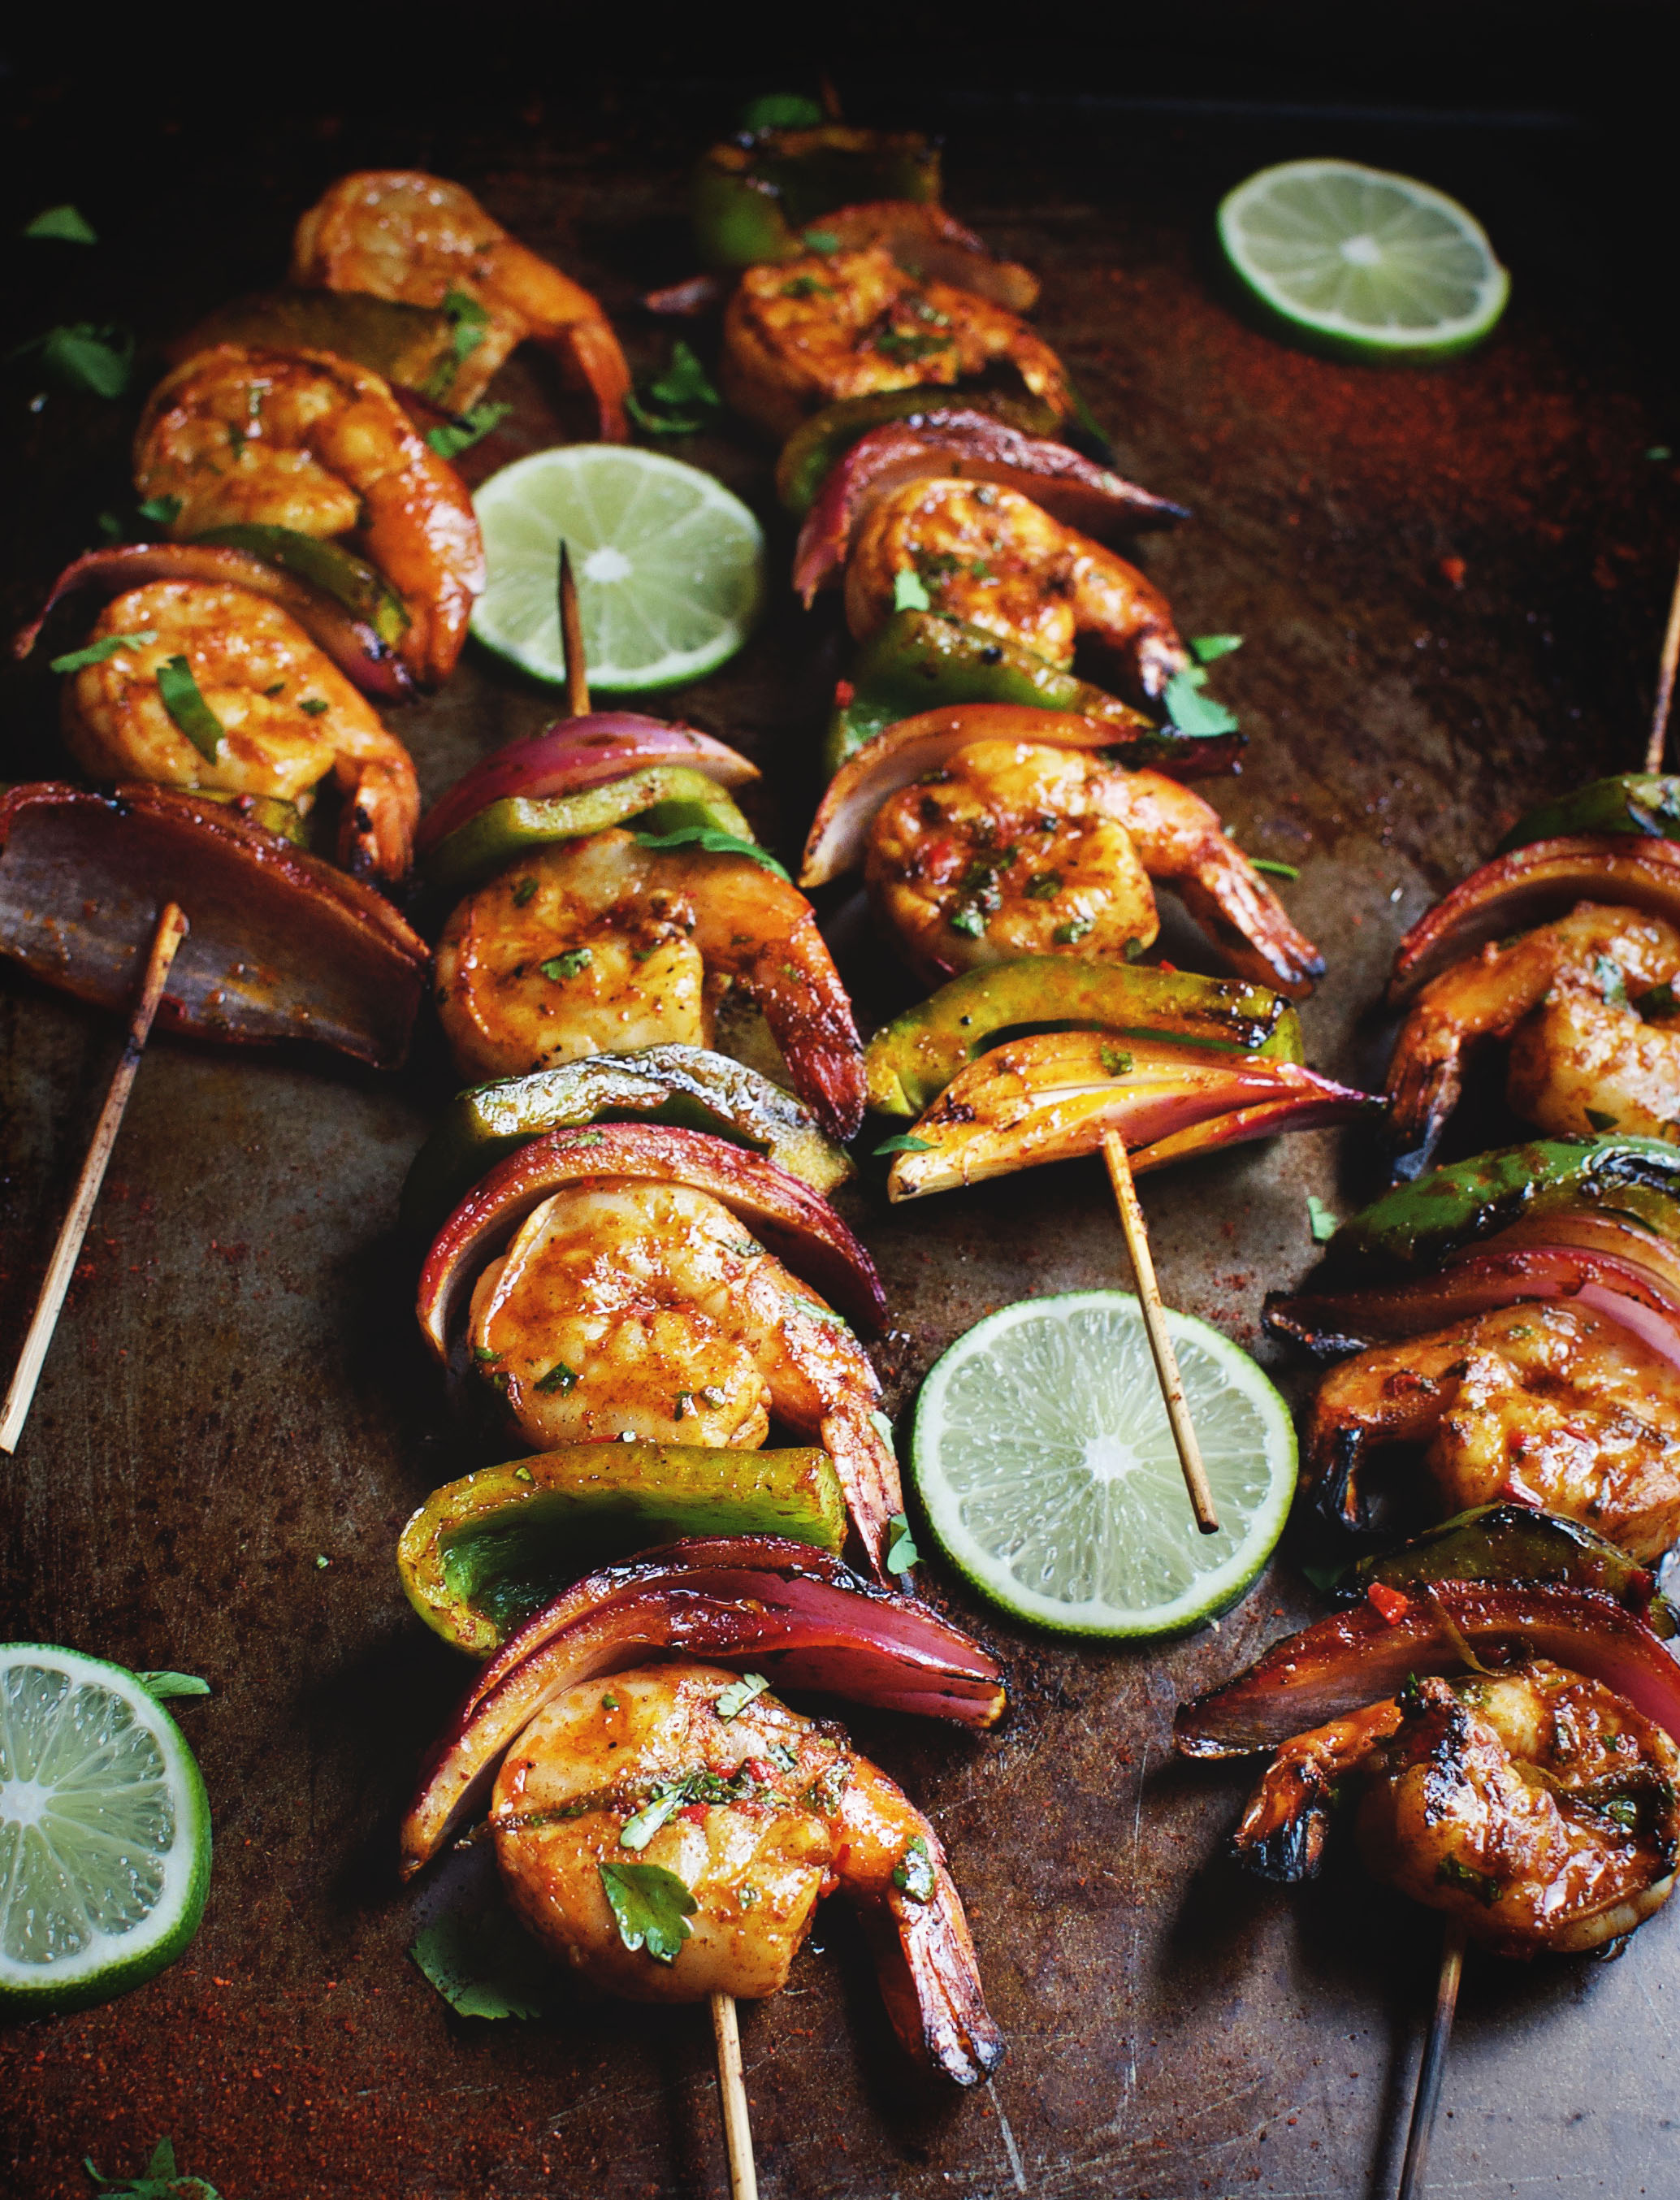 Grilled Chili Lime Shrimp Kabobs - Simply So Healthy